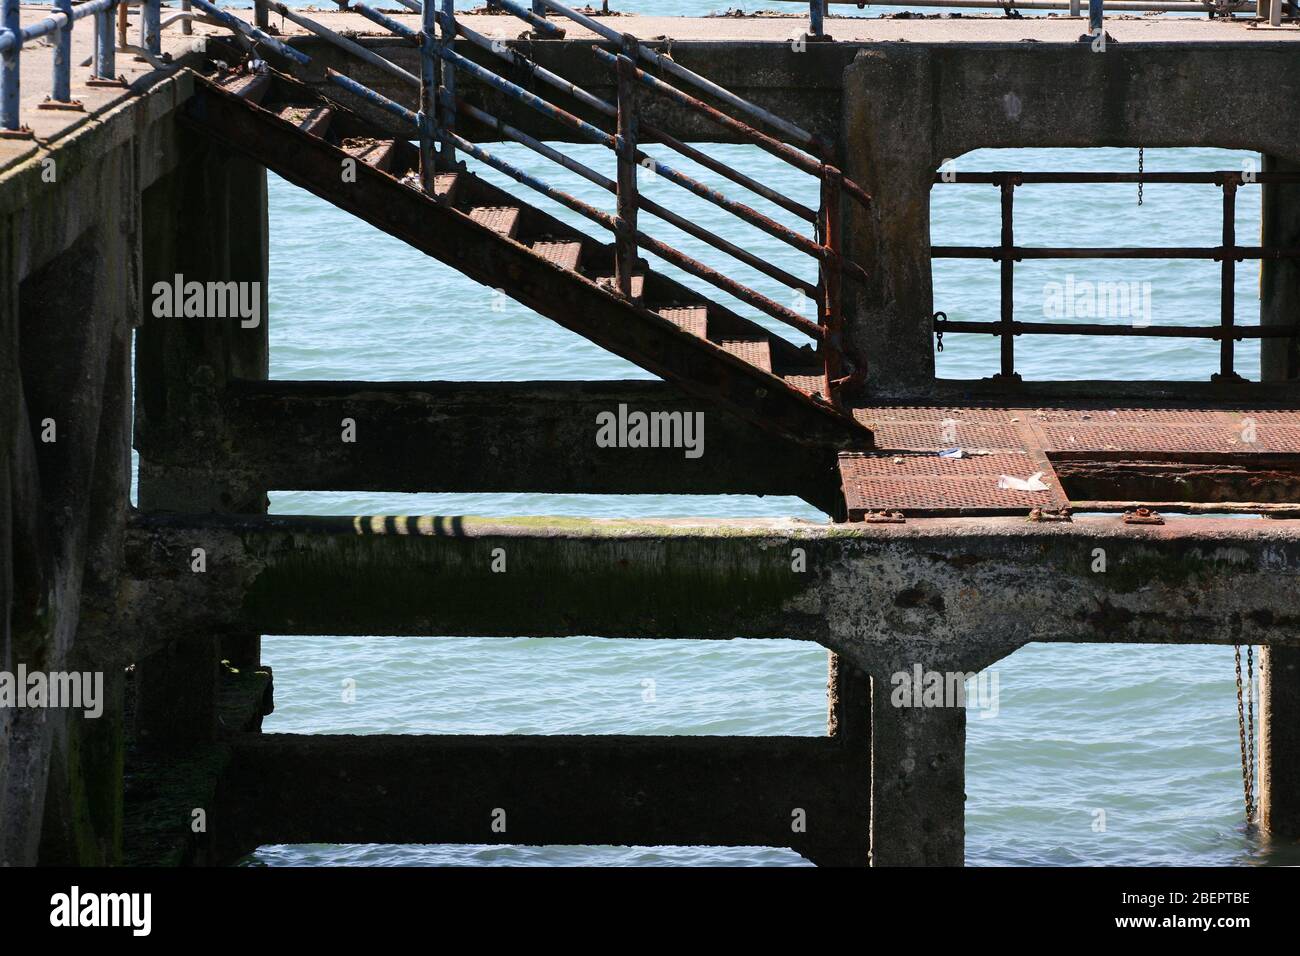 Victoria Pier, an old jetty by the Hot Walls, Portsmouth Harbour entrance, Hampshire, England, UK Stock Photo